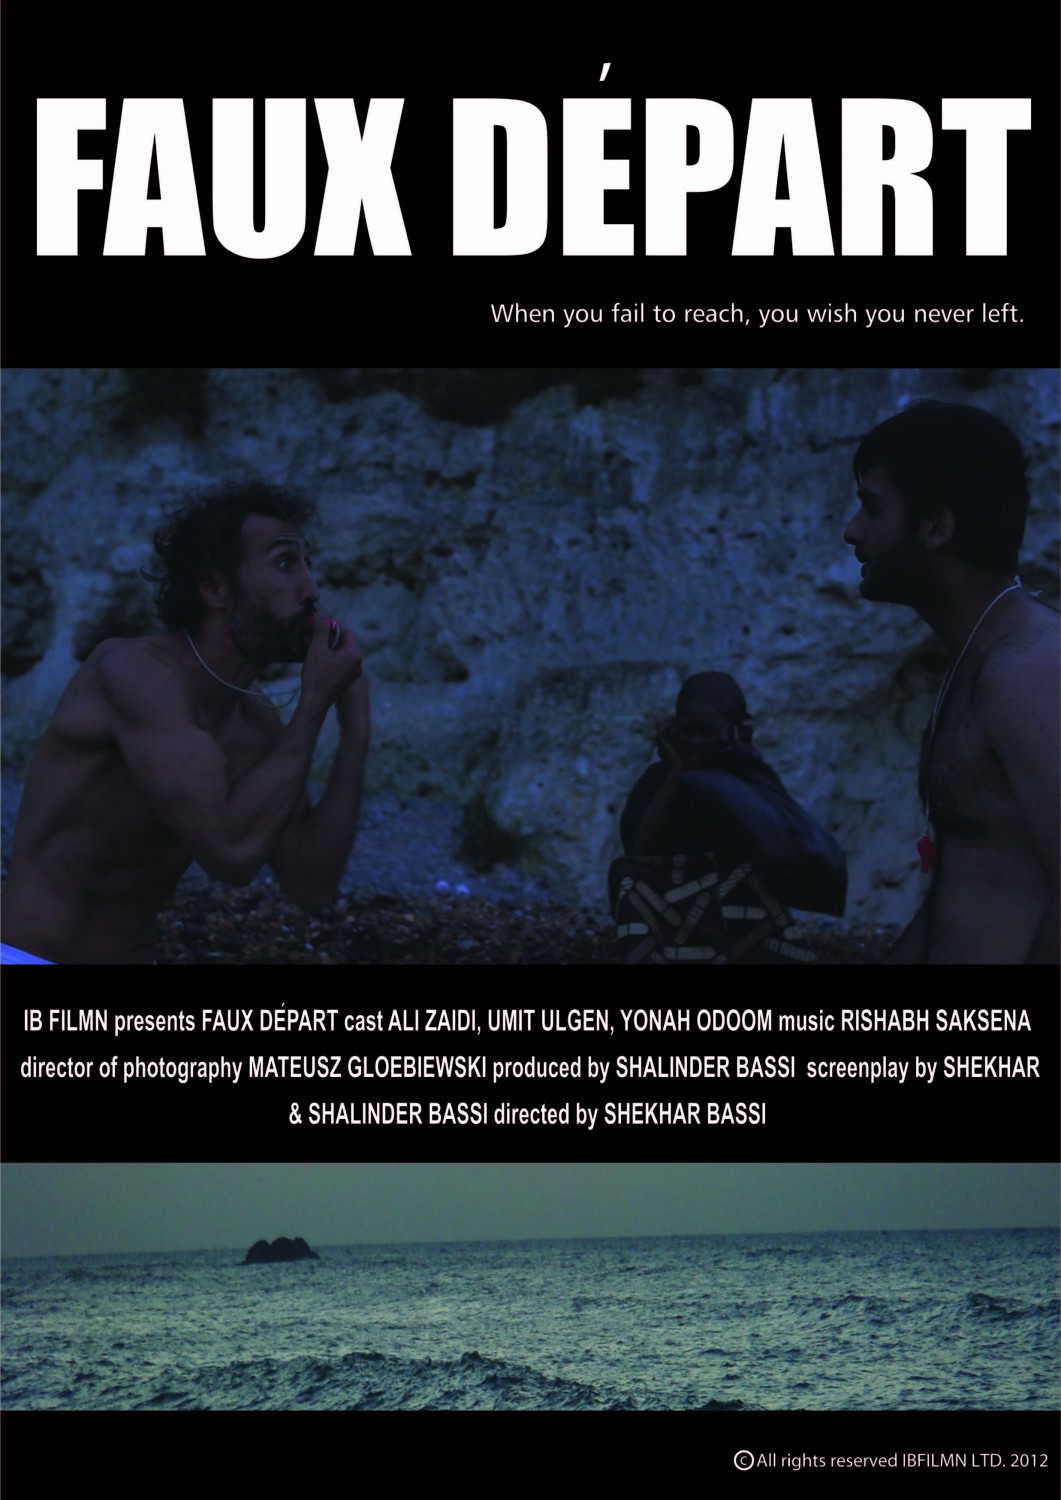 Extra Large Movie Poster Image for Faux Depart